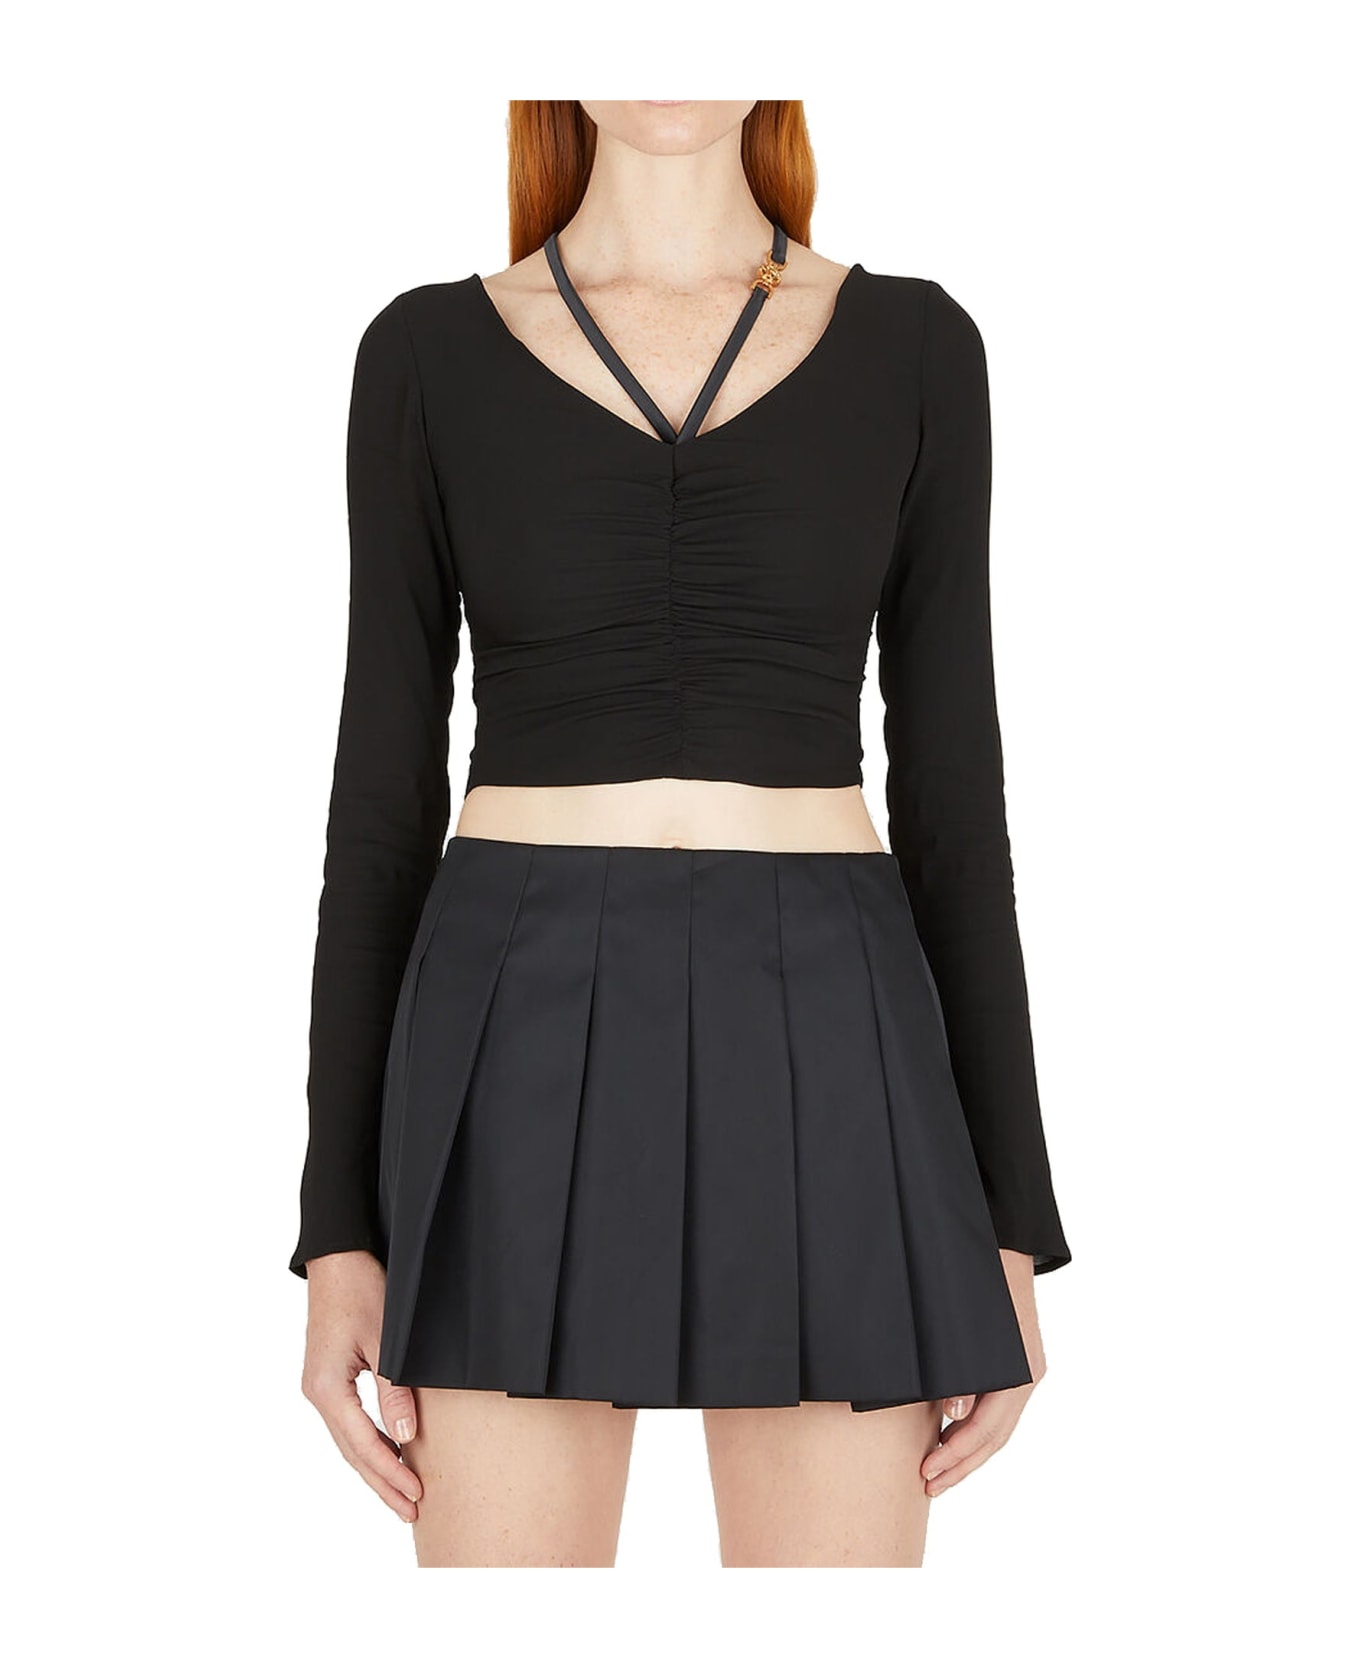 Versace Ruched Top - Black